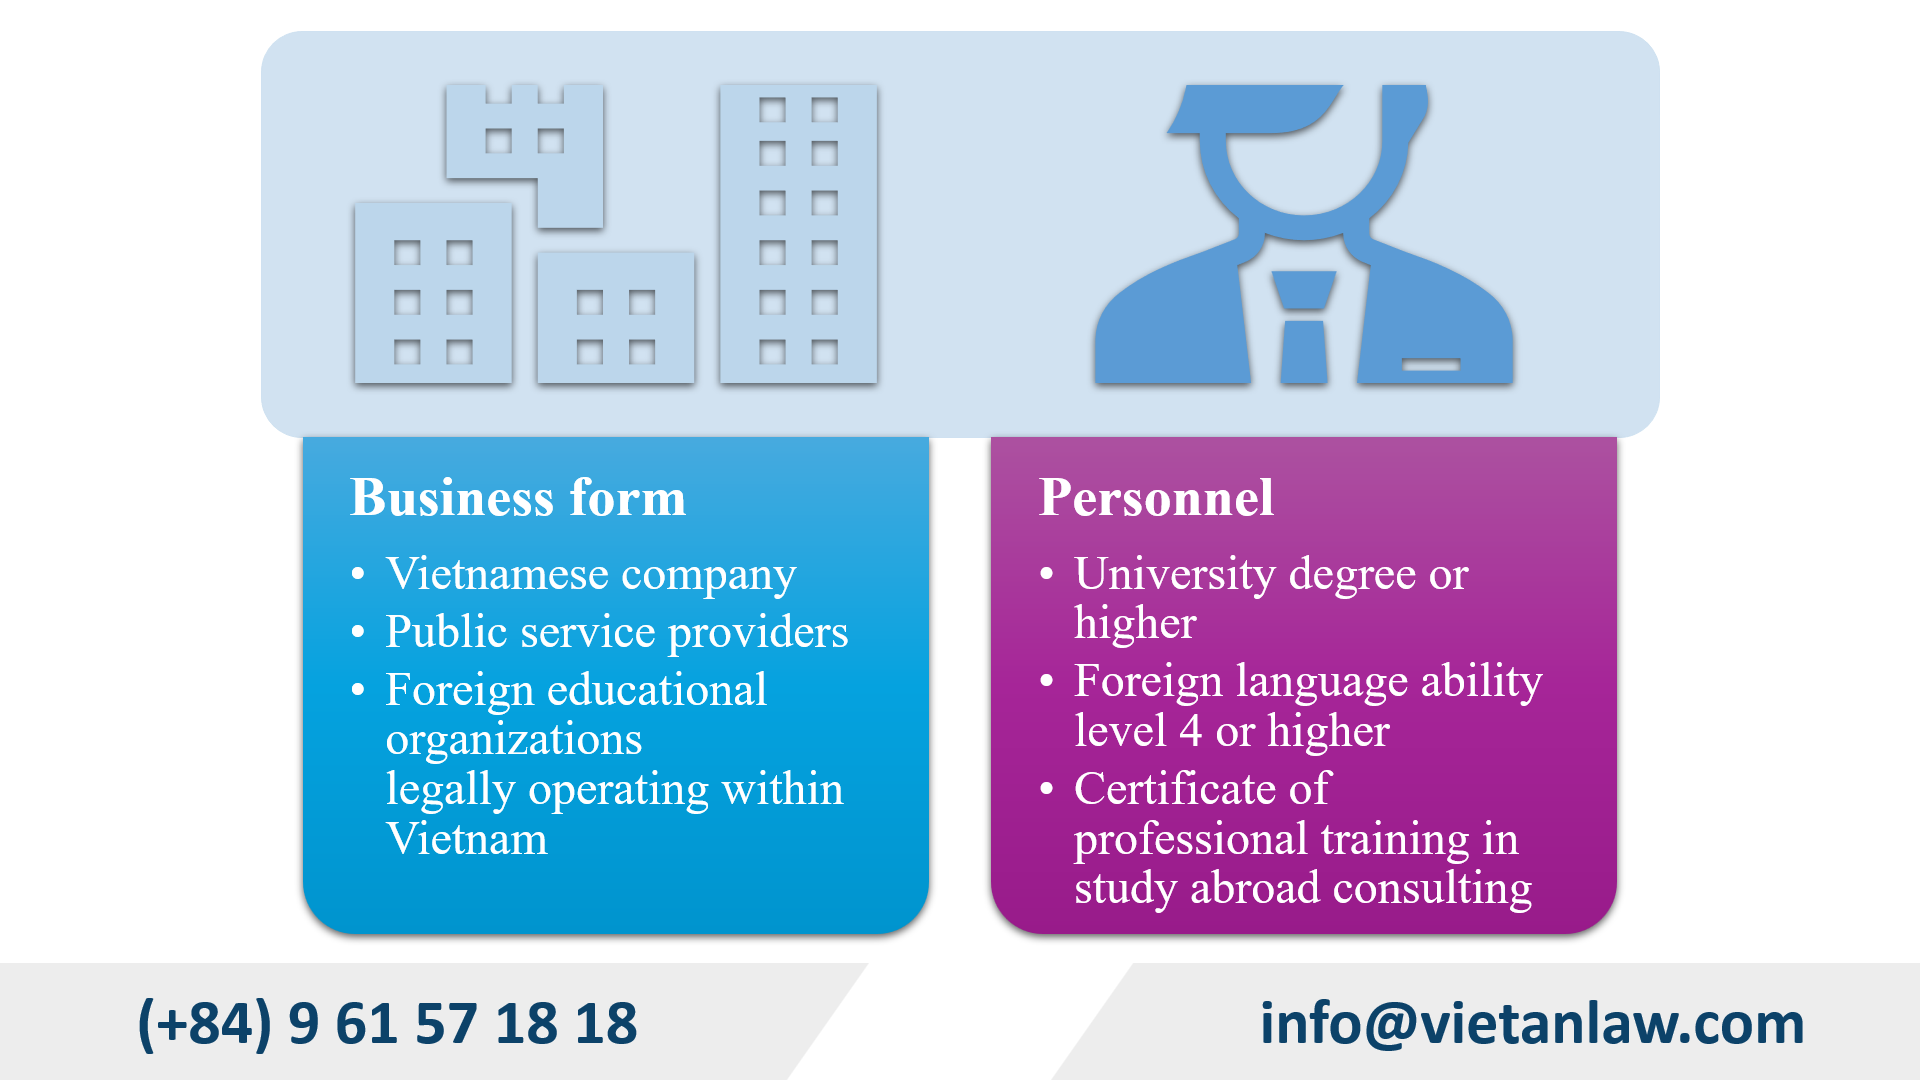 Business conditions for study abroad consulting services in Vietnam